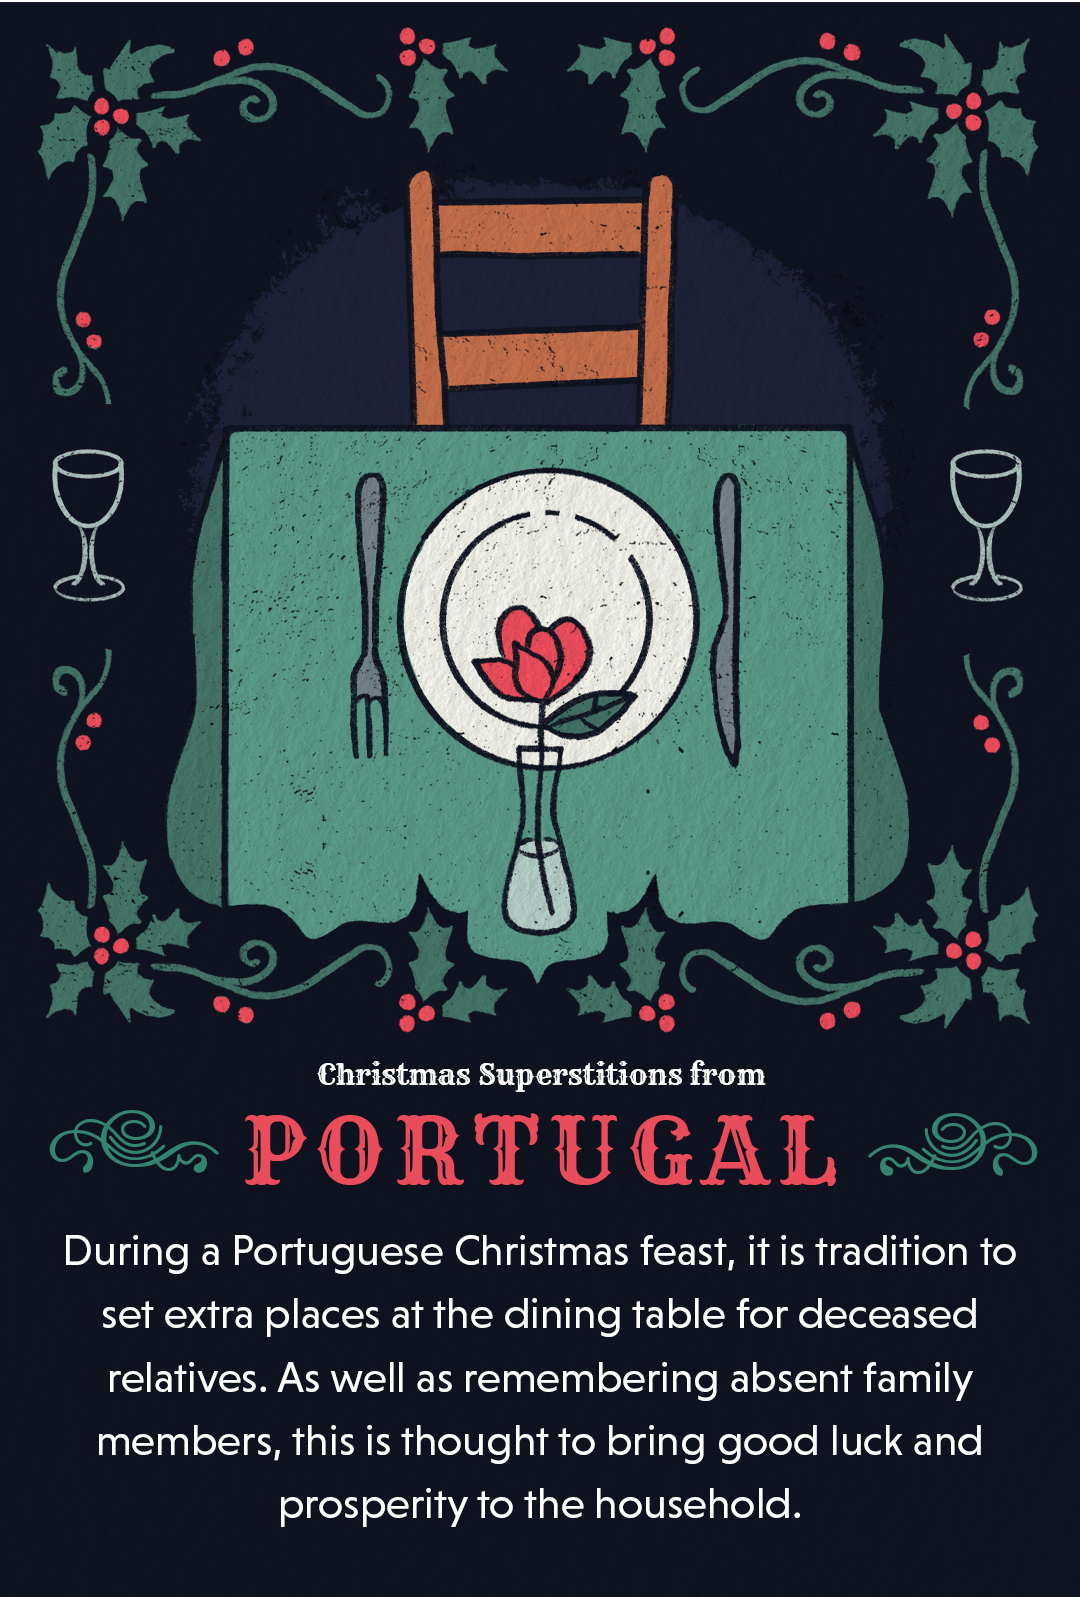 Unusual Christmas folklore from Portugal